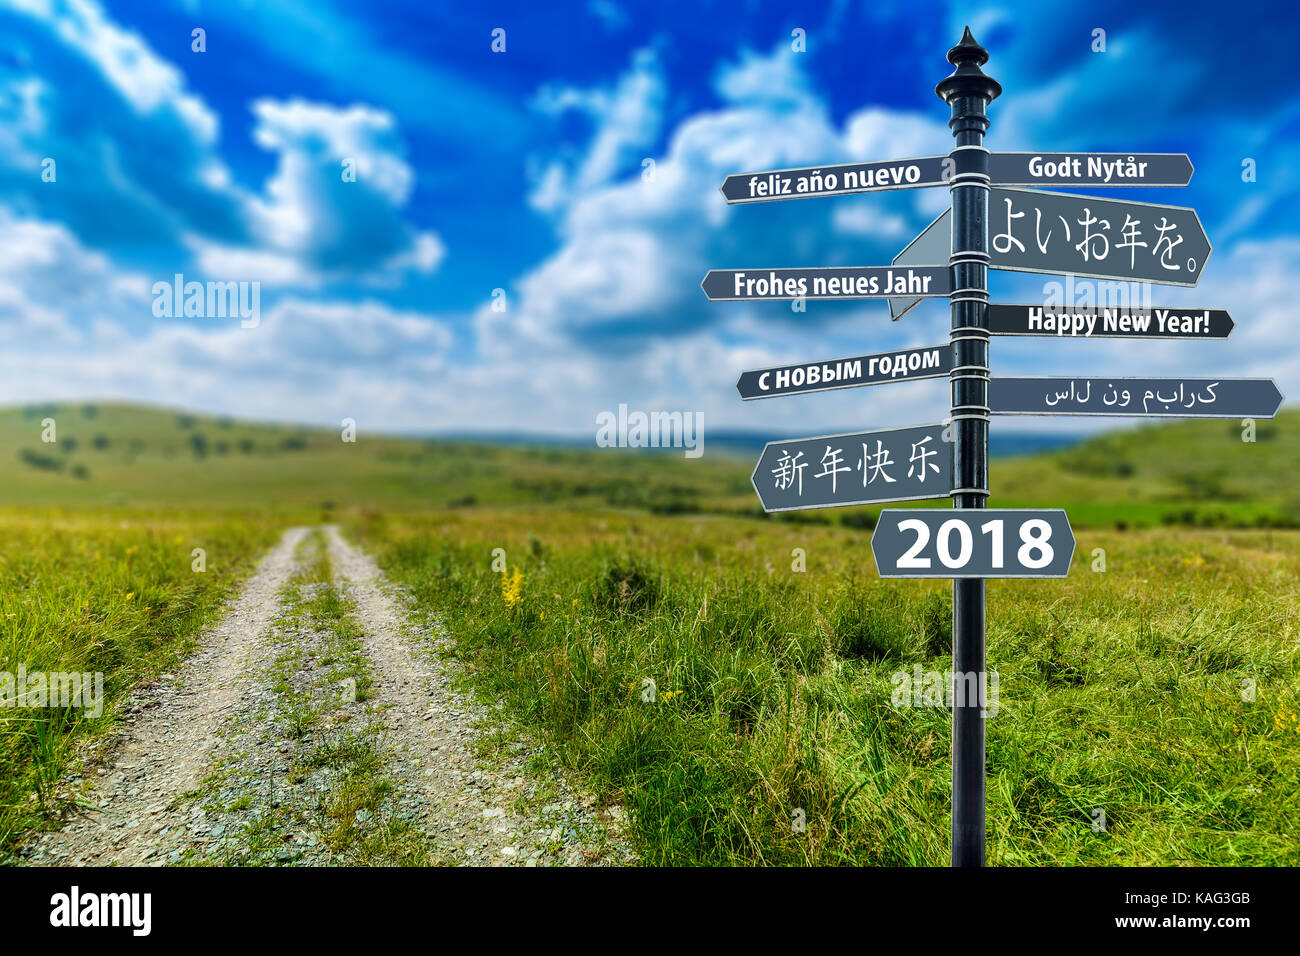 Signpost whit Happy New Year in many languages, field way in background Stock Photo